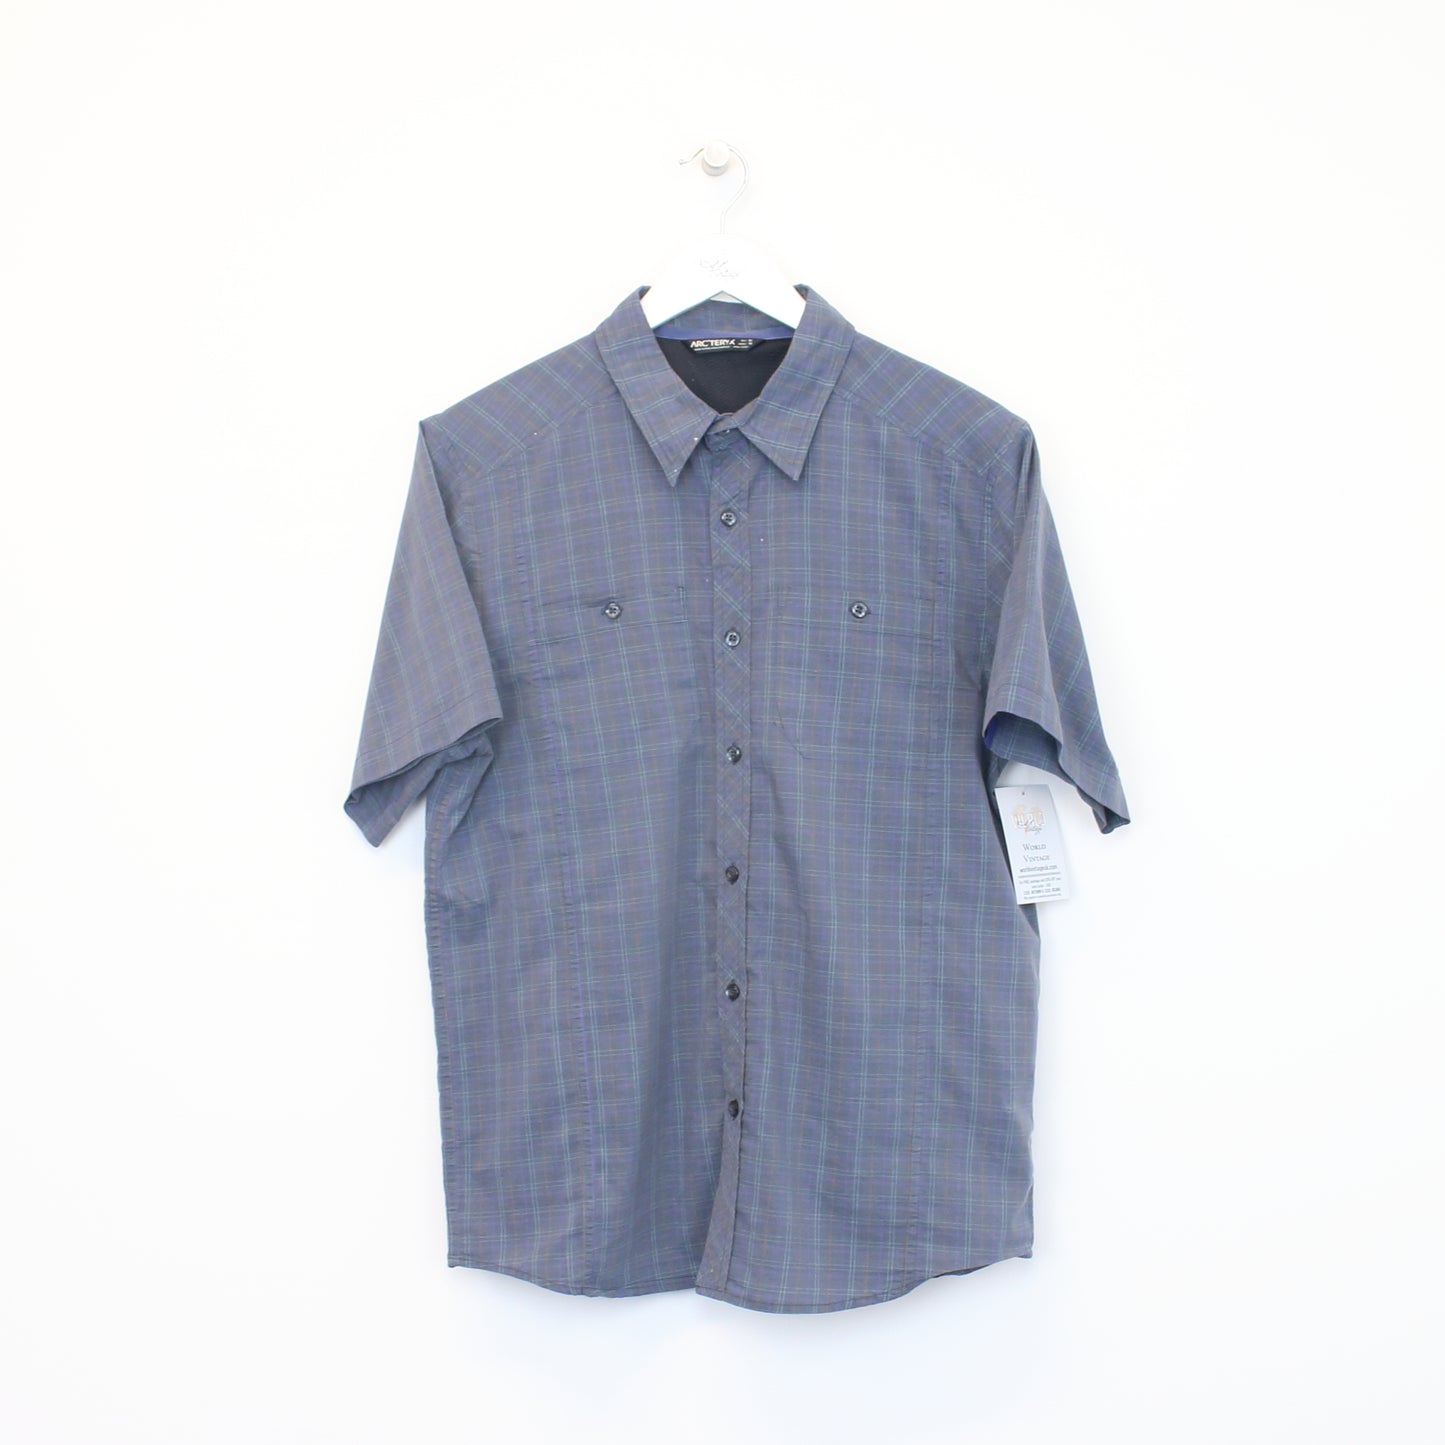 Vintage Arc'teryx checked shirt in blue and green. Best fits M